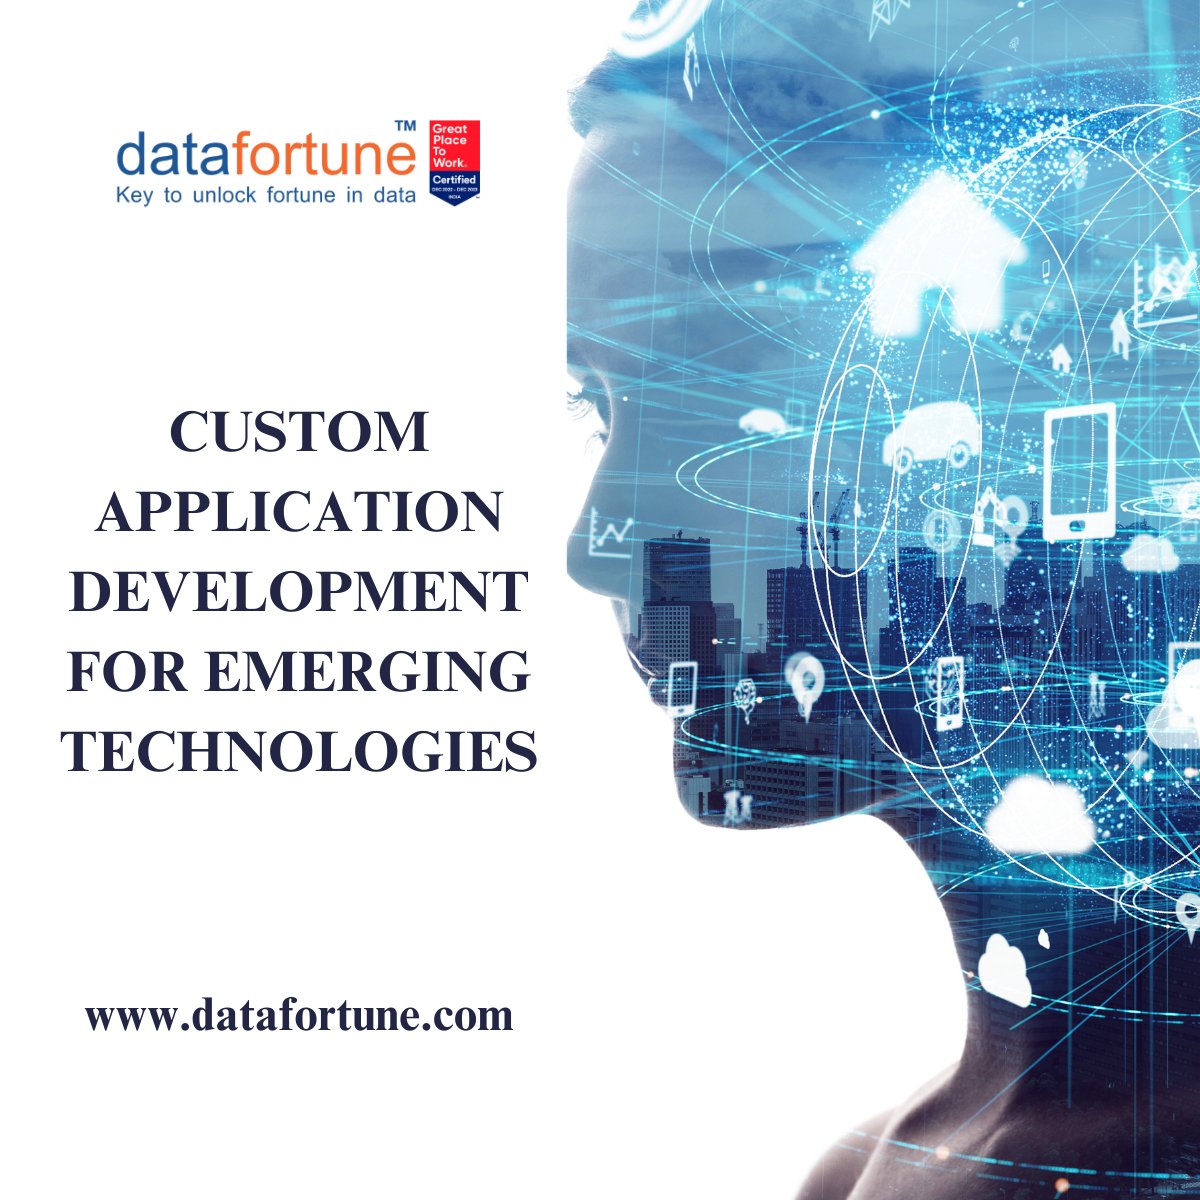 Here is our latest blog highlighting 'Custom Application Development for Emerging Technologies: What Businesses Need to Know' - datafortune.com/custom-applica…

#CustomAppDevelopment #ApplicationDevelopmentg #ITServices
#Technology #Services #ITServices #Datafortune